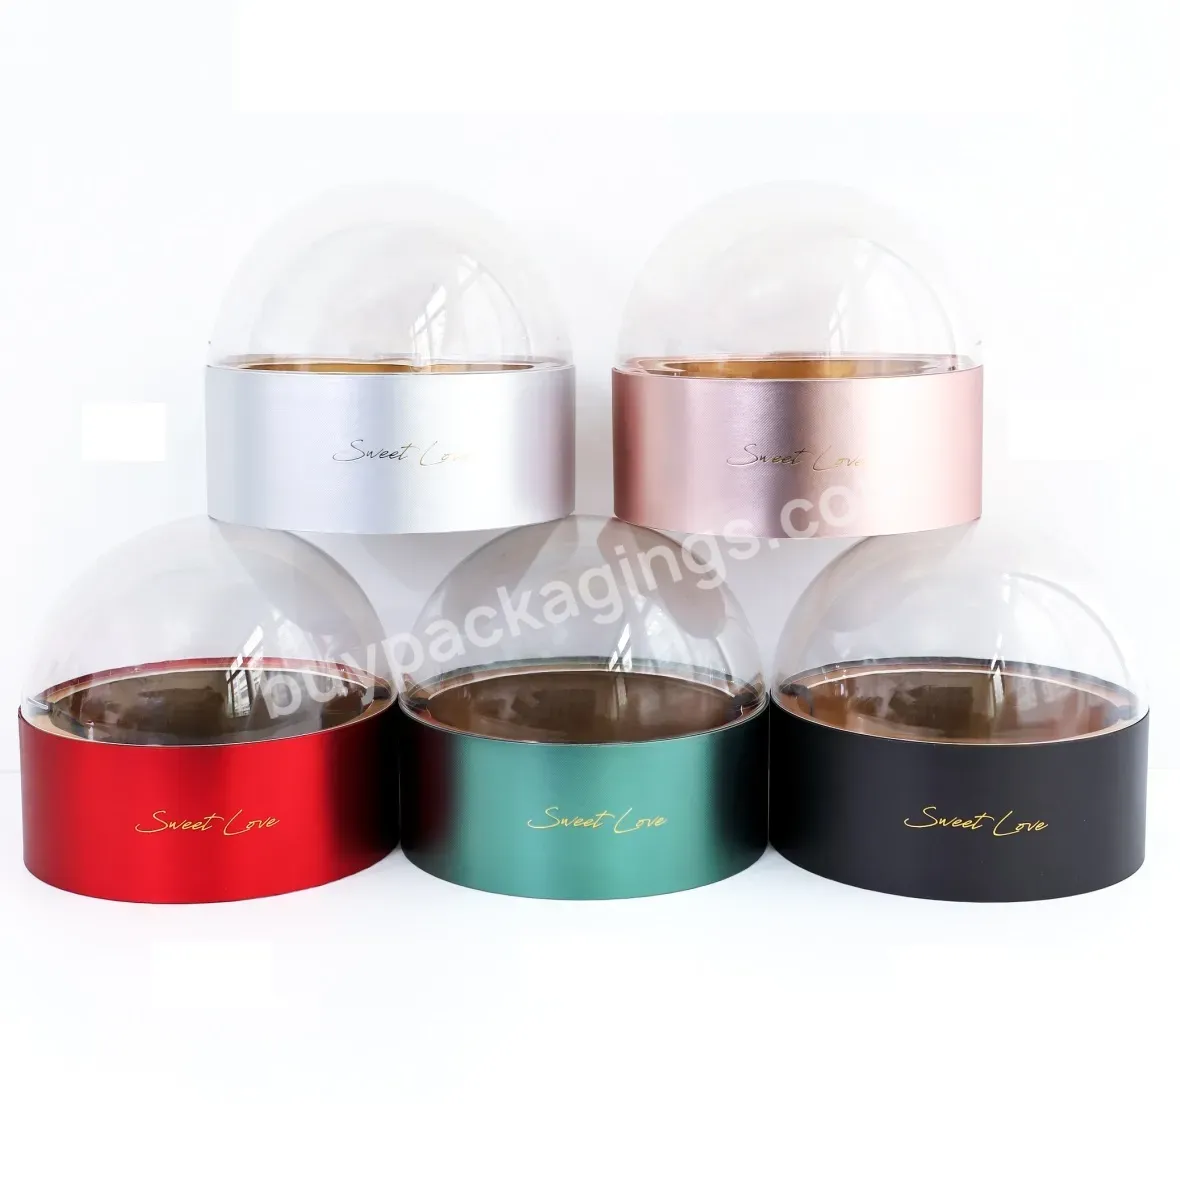 2021 New Release Rounded Metallic Surface Finished Flower Gift Box With Spherical Acrylic Cover - Buy Rounded Metallic Surface Finished Box,Flower Gift Box,Gift Box With Spherical Acrylic Cover.